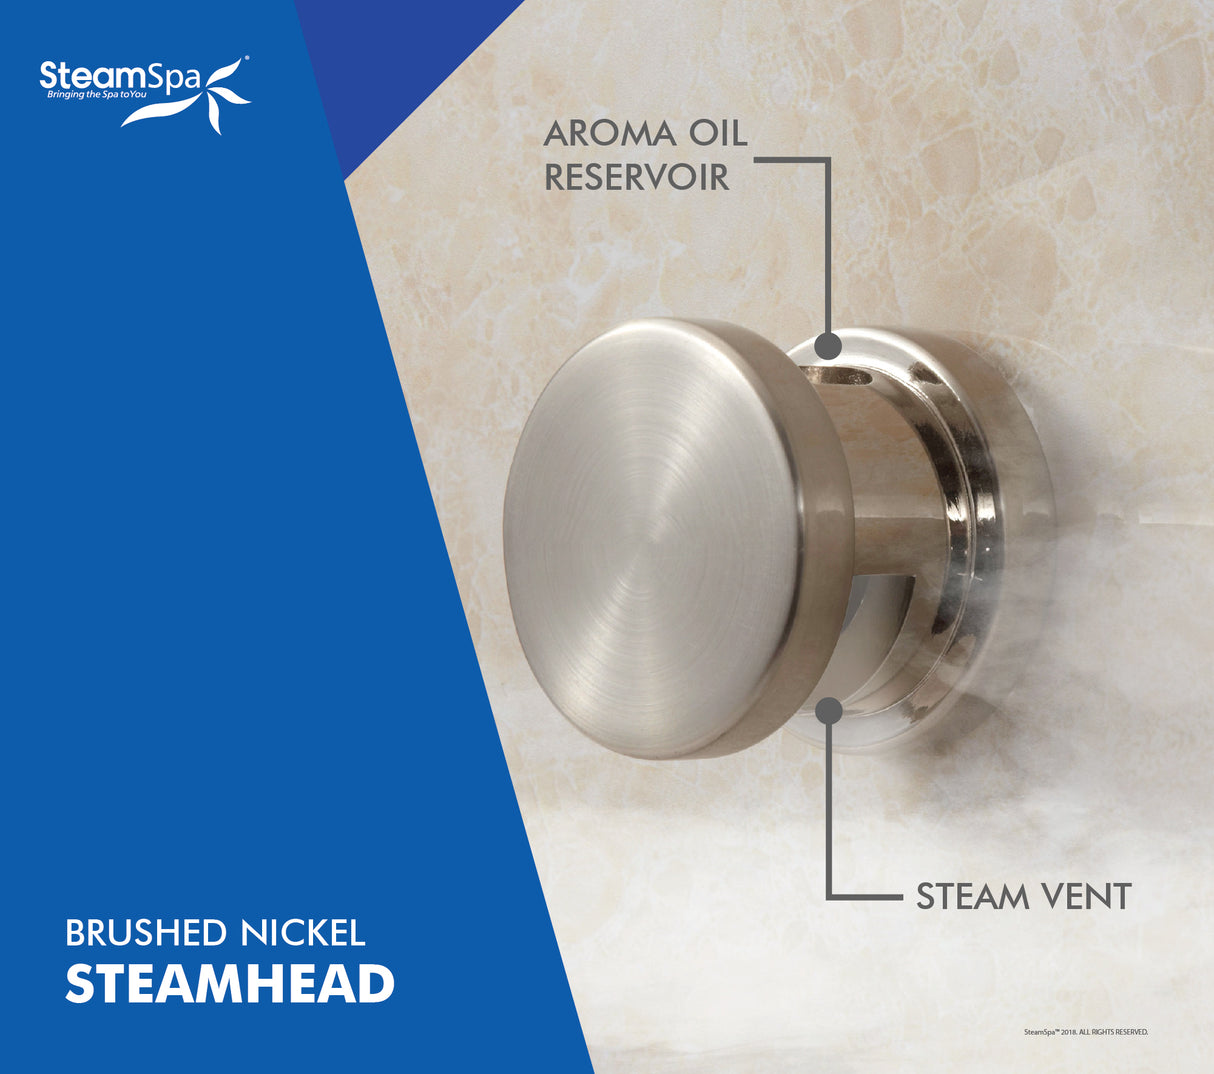 SteamSpa Oasis 4.5 KW QuickStart Acu-Steam Bath Generator Package with Built-in Auto Drain in Brushed Nickel OAT450BN-A